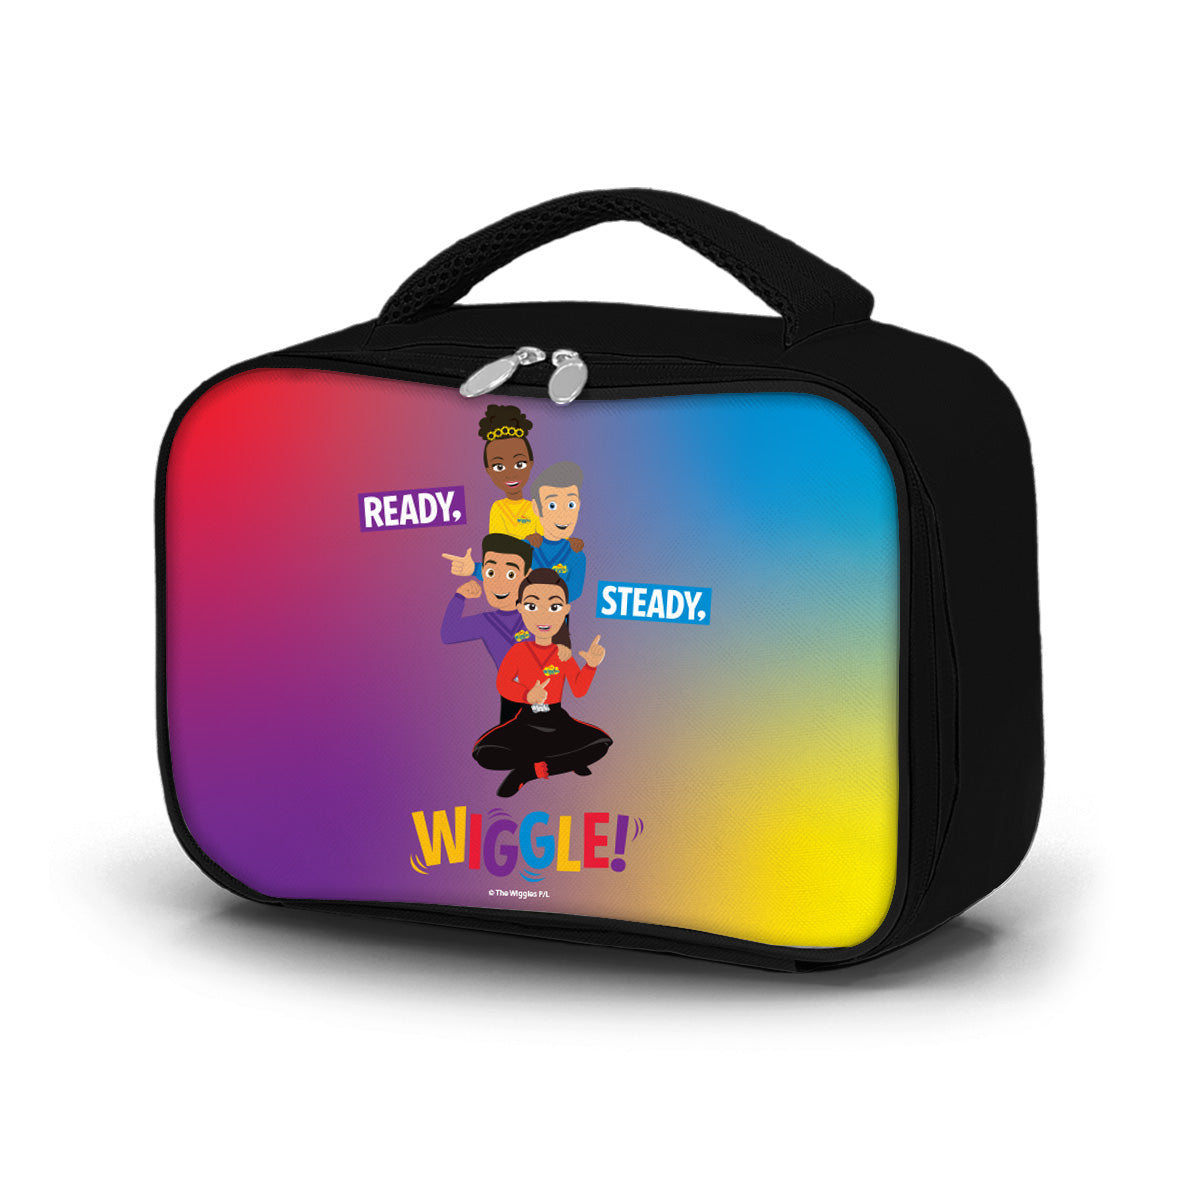 The Wiggles Lunch Cooler Group V1